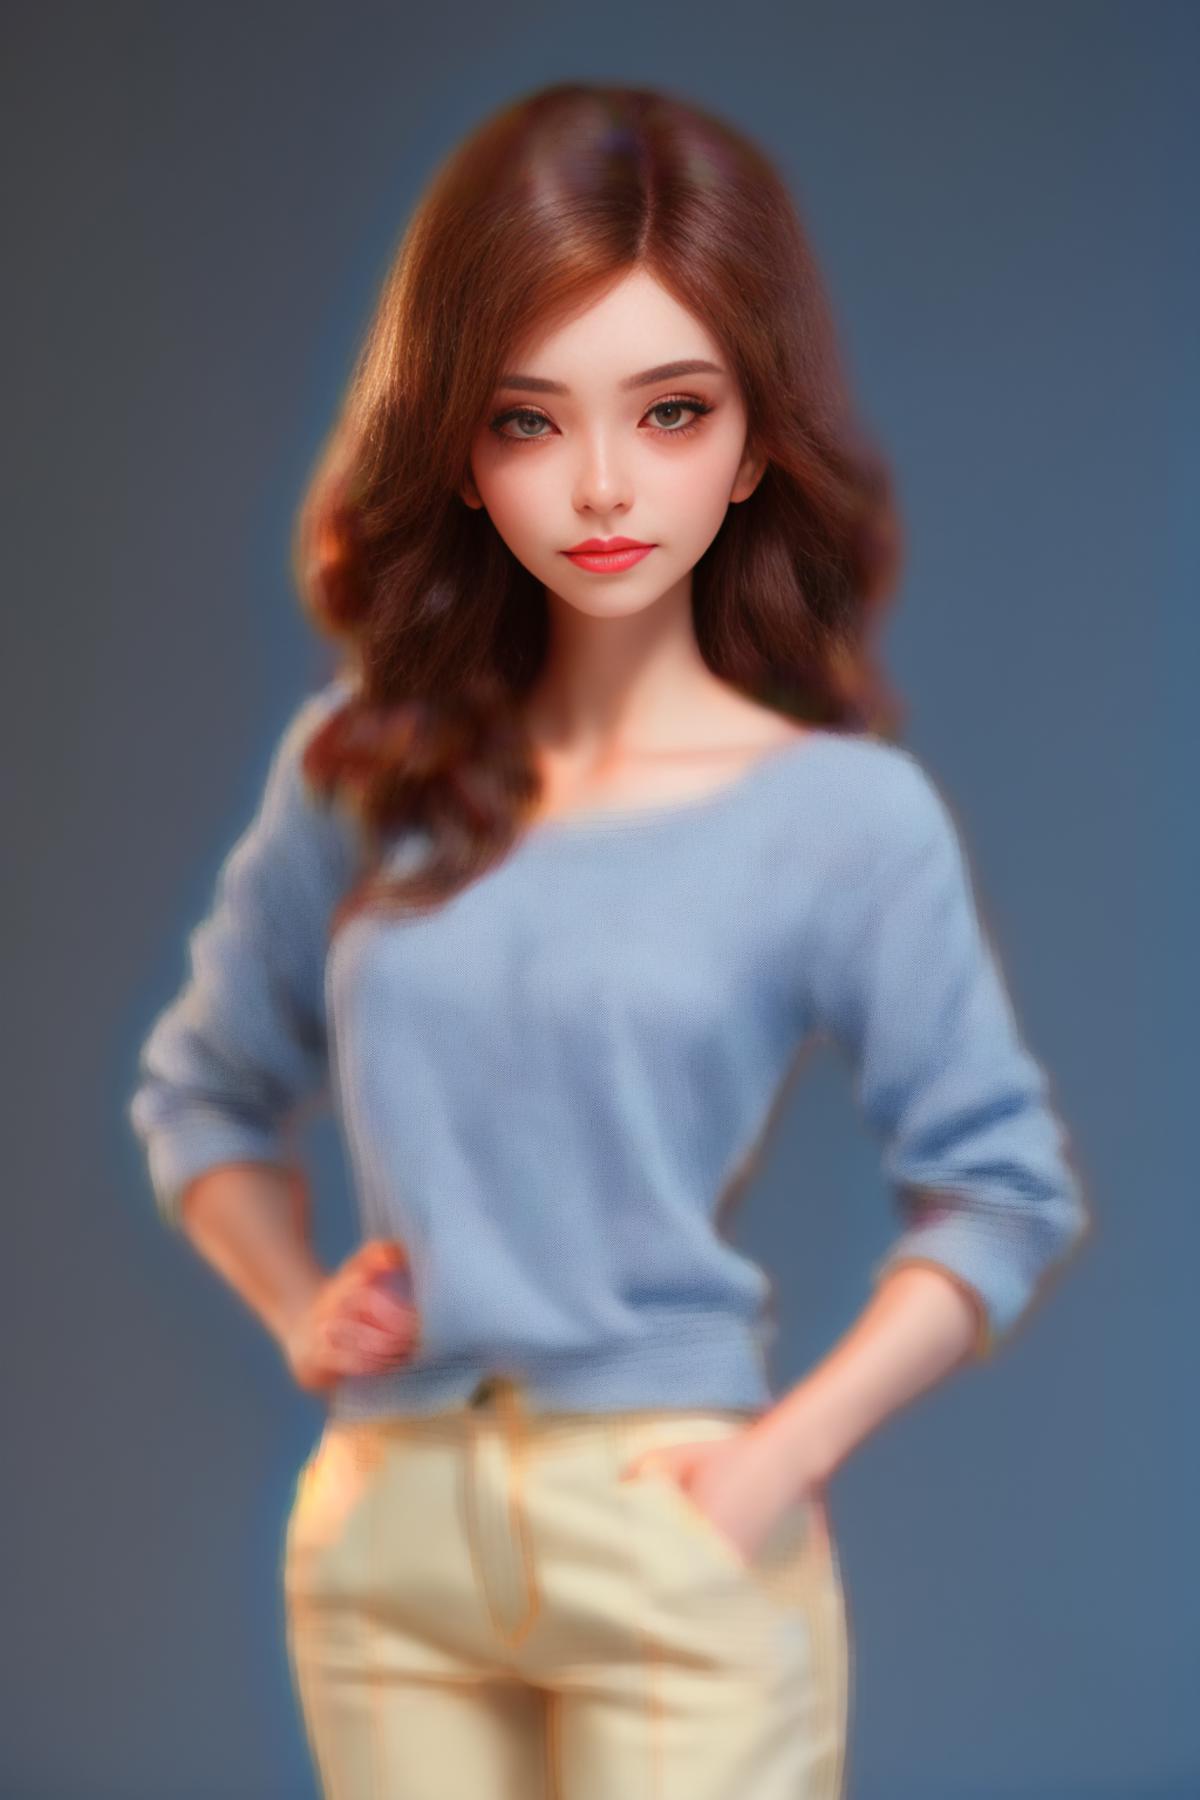 MIX realistic image by mit_itg